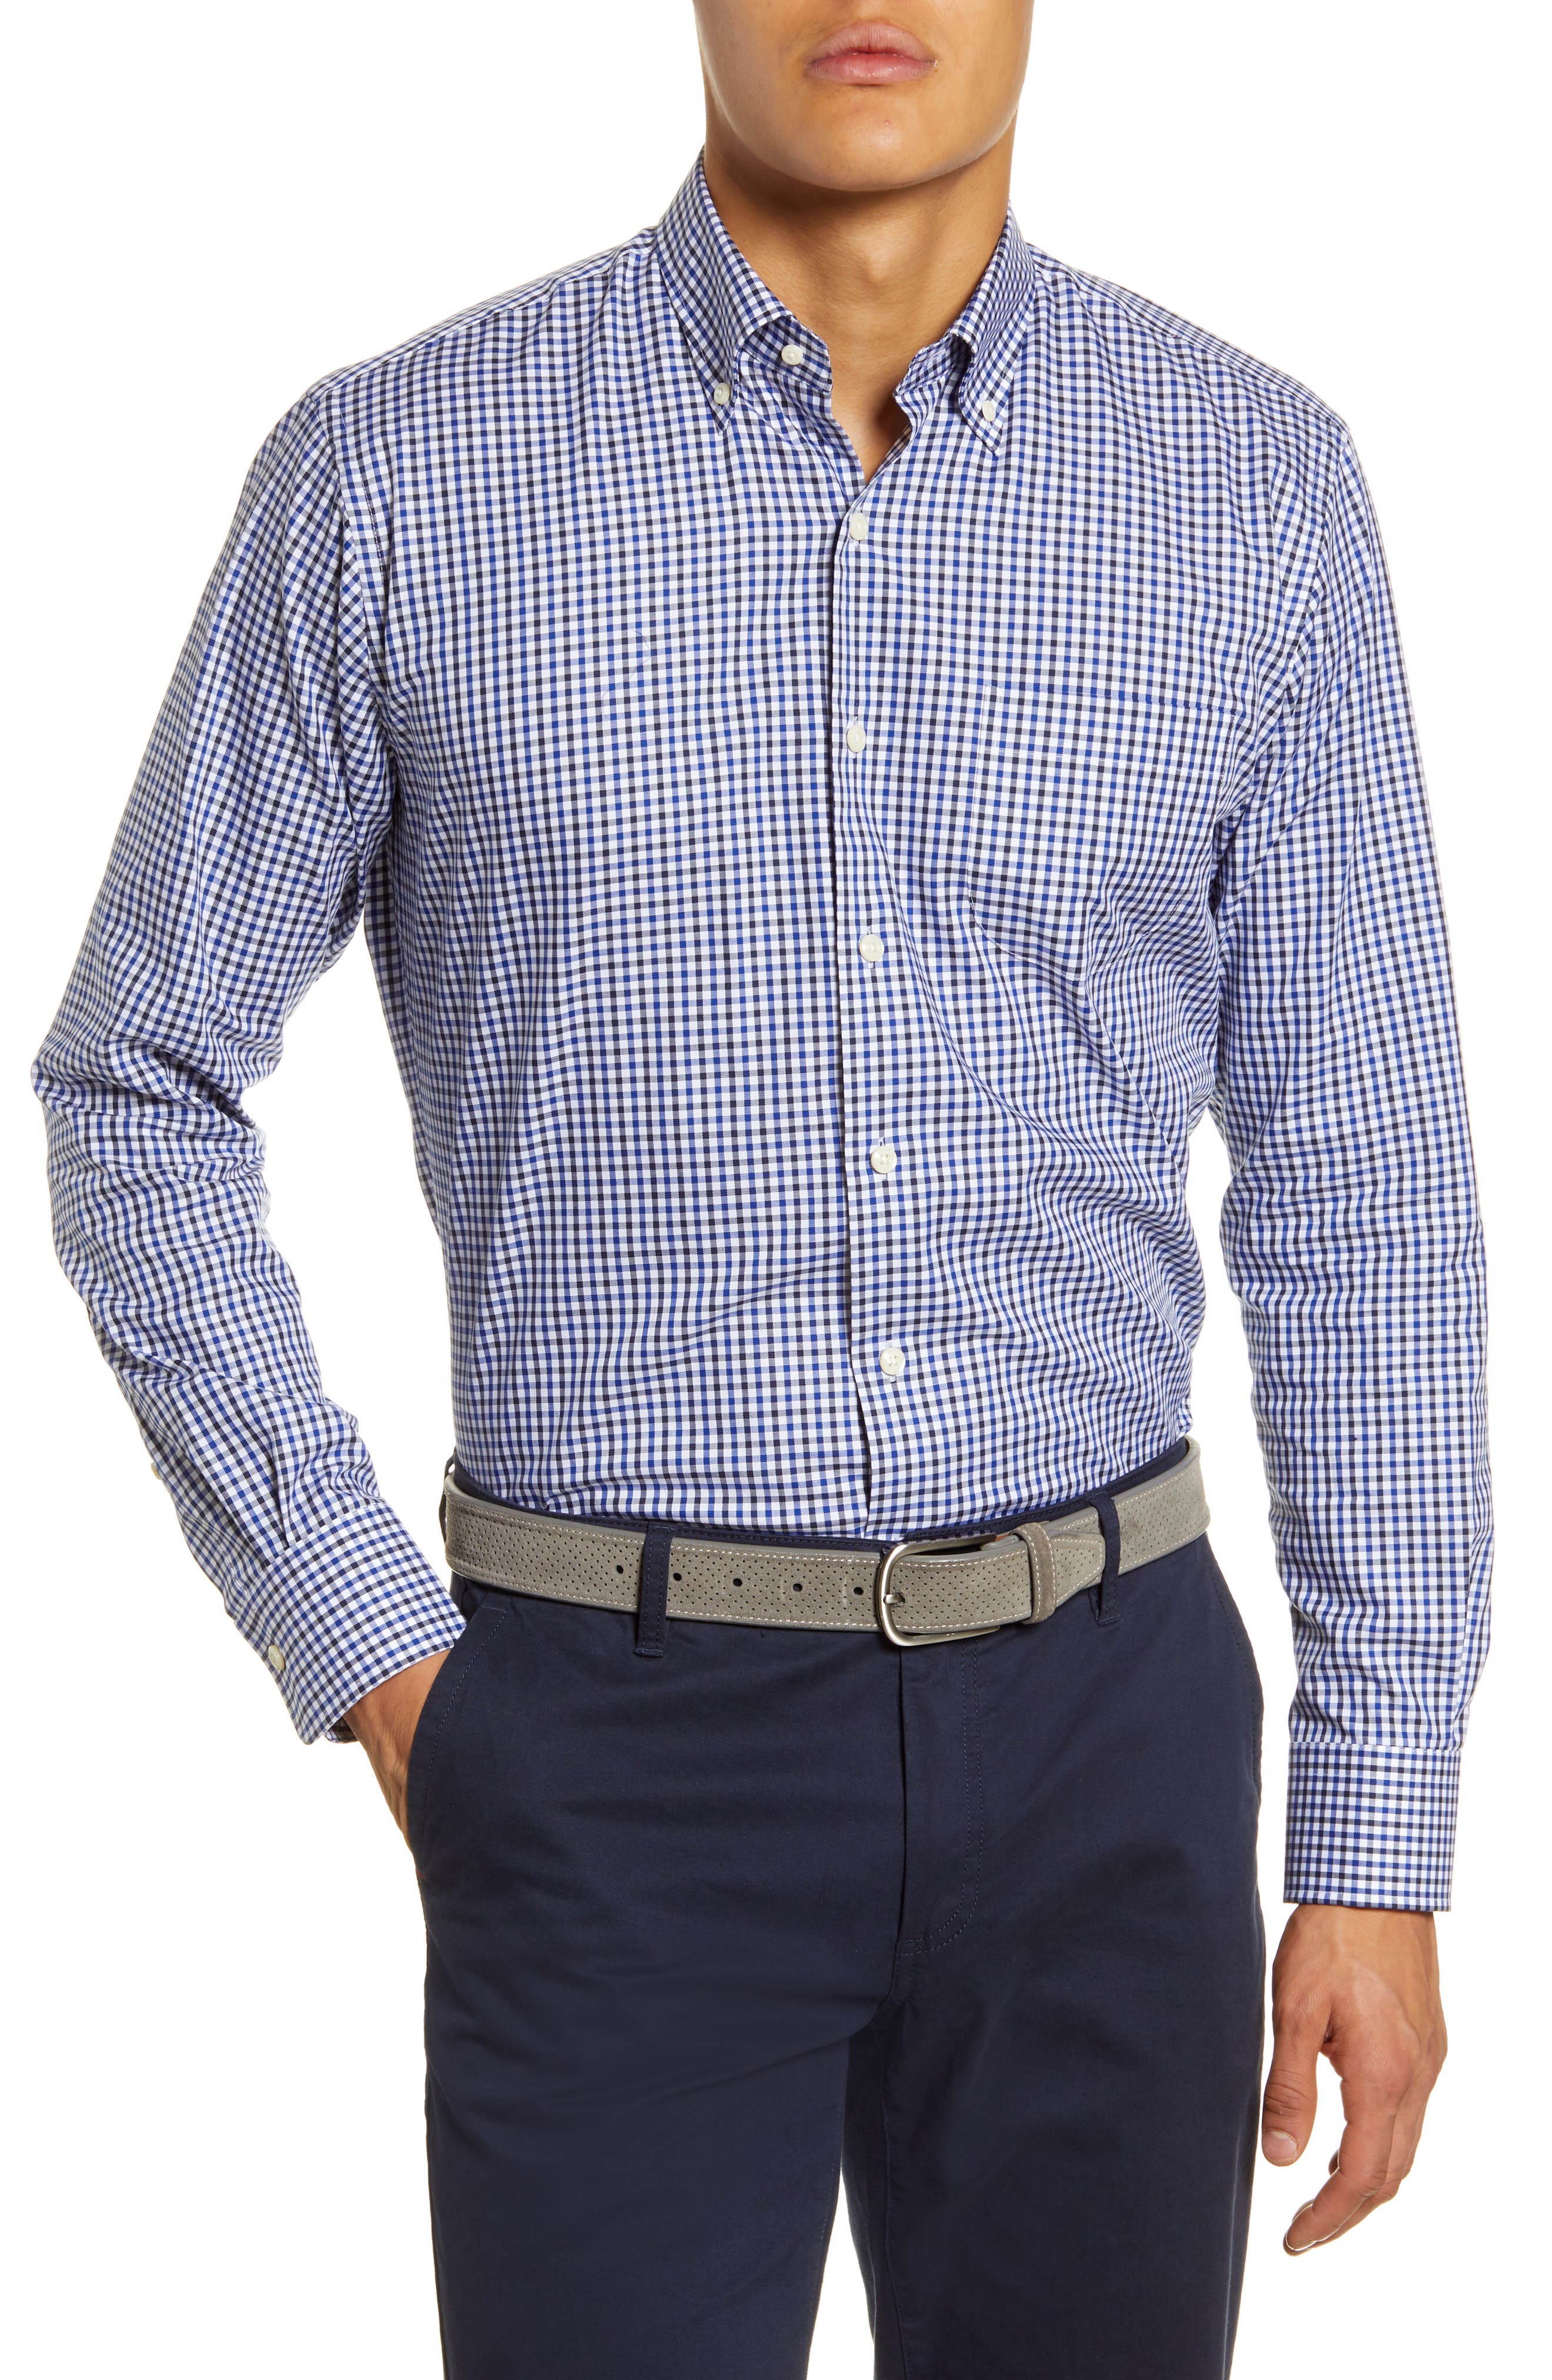 Men's Business Casual Long Sleeve ...